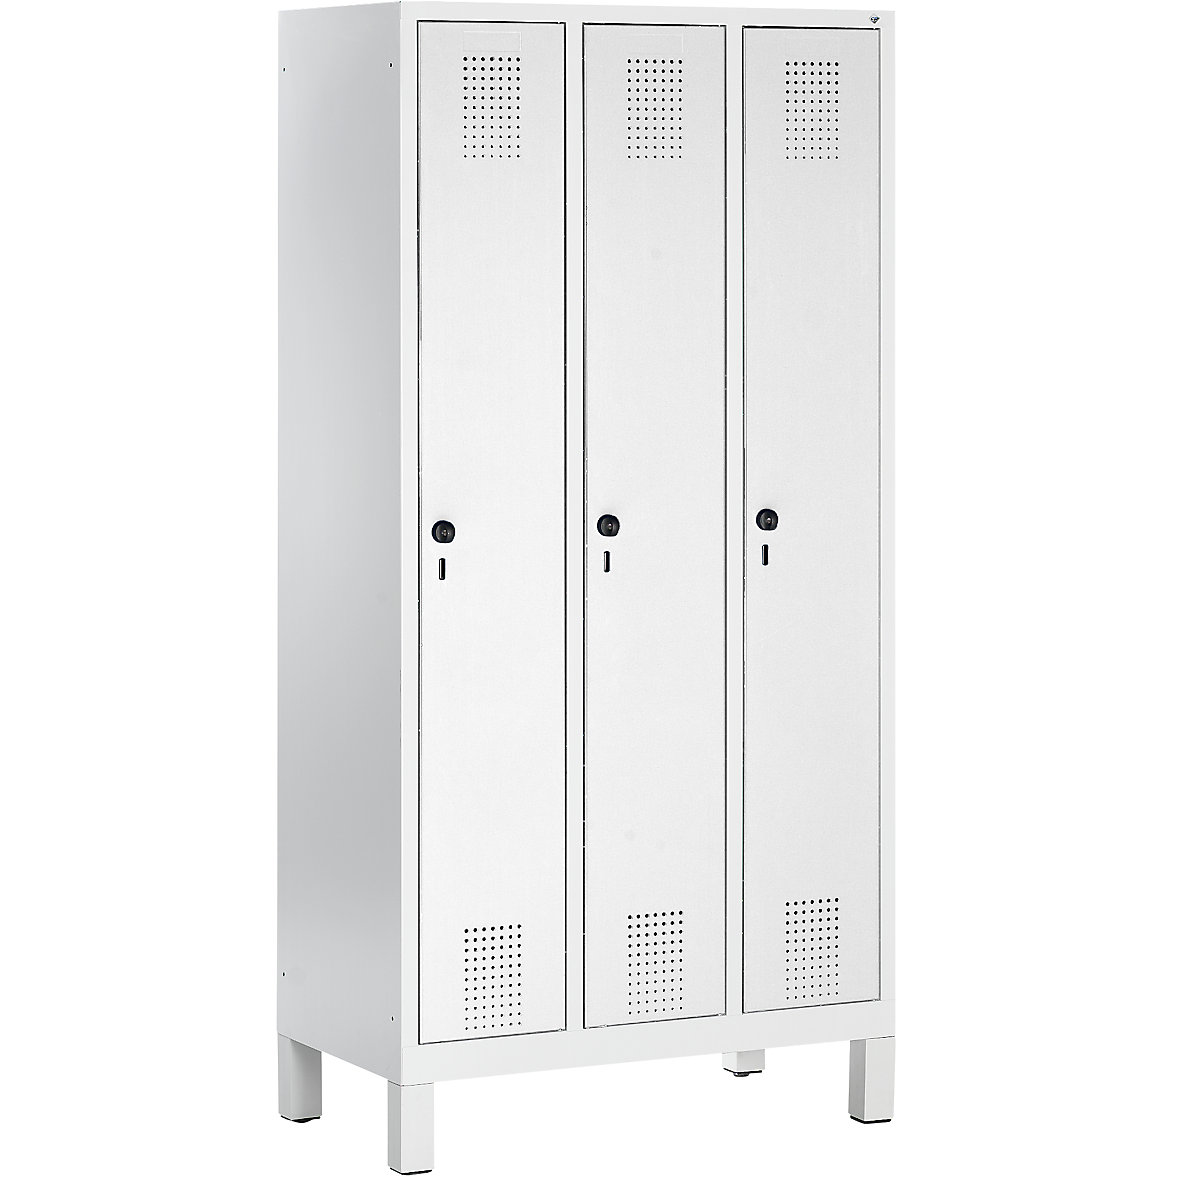 EVOLO cloakroom locker – C+P, with plastic feet, 3 compartments, compartment width 300 mm, light grey